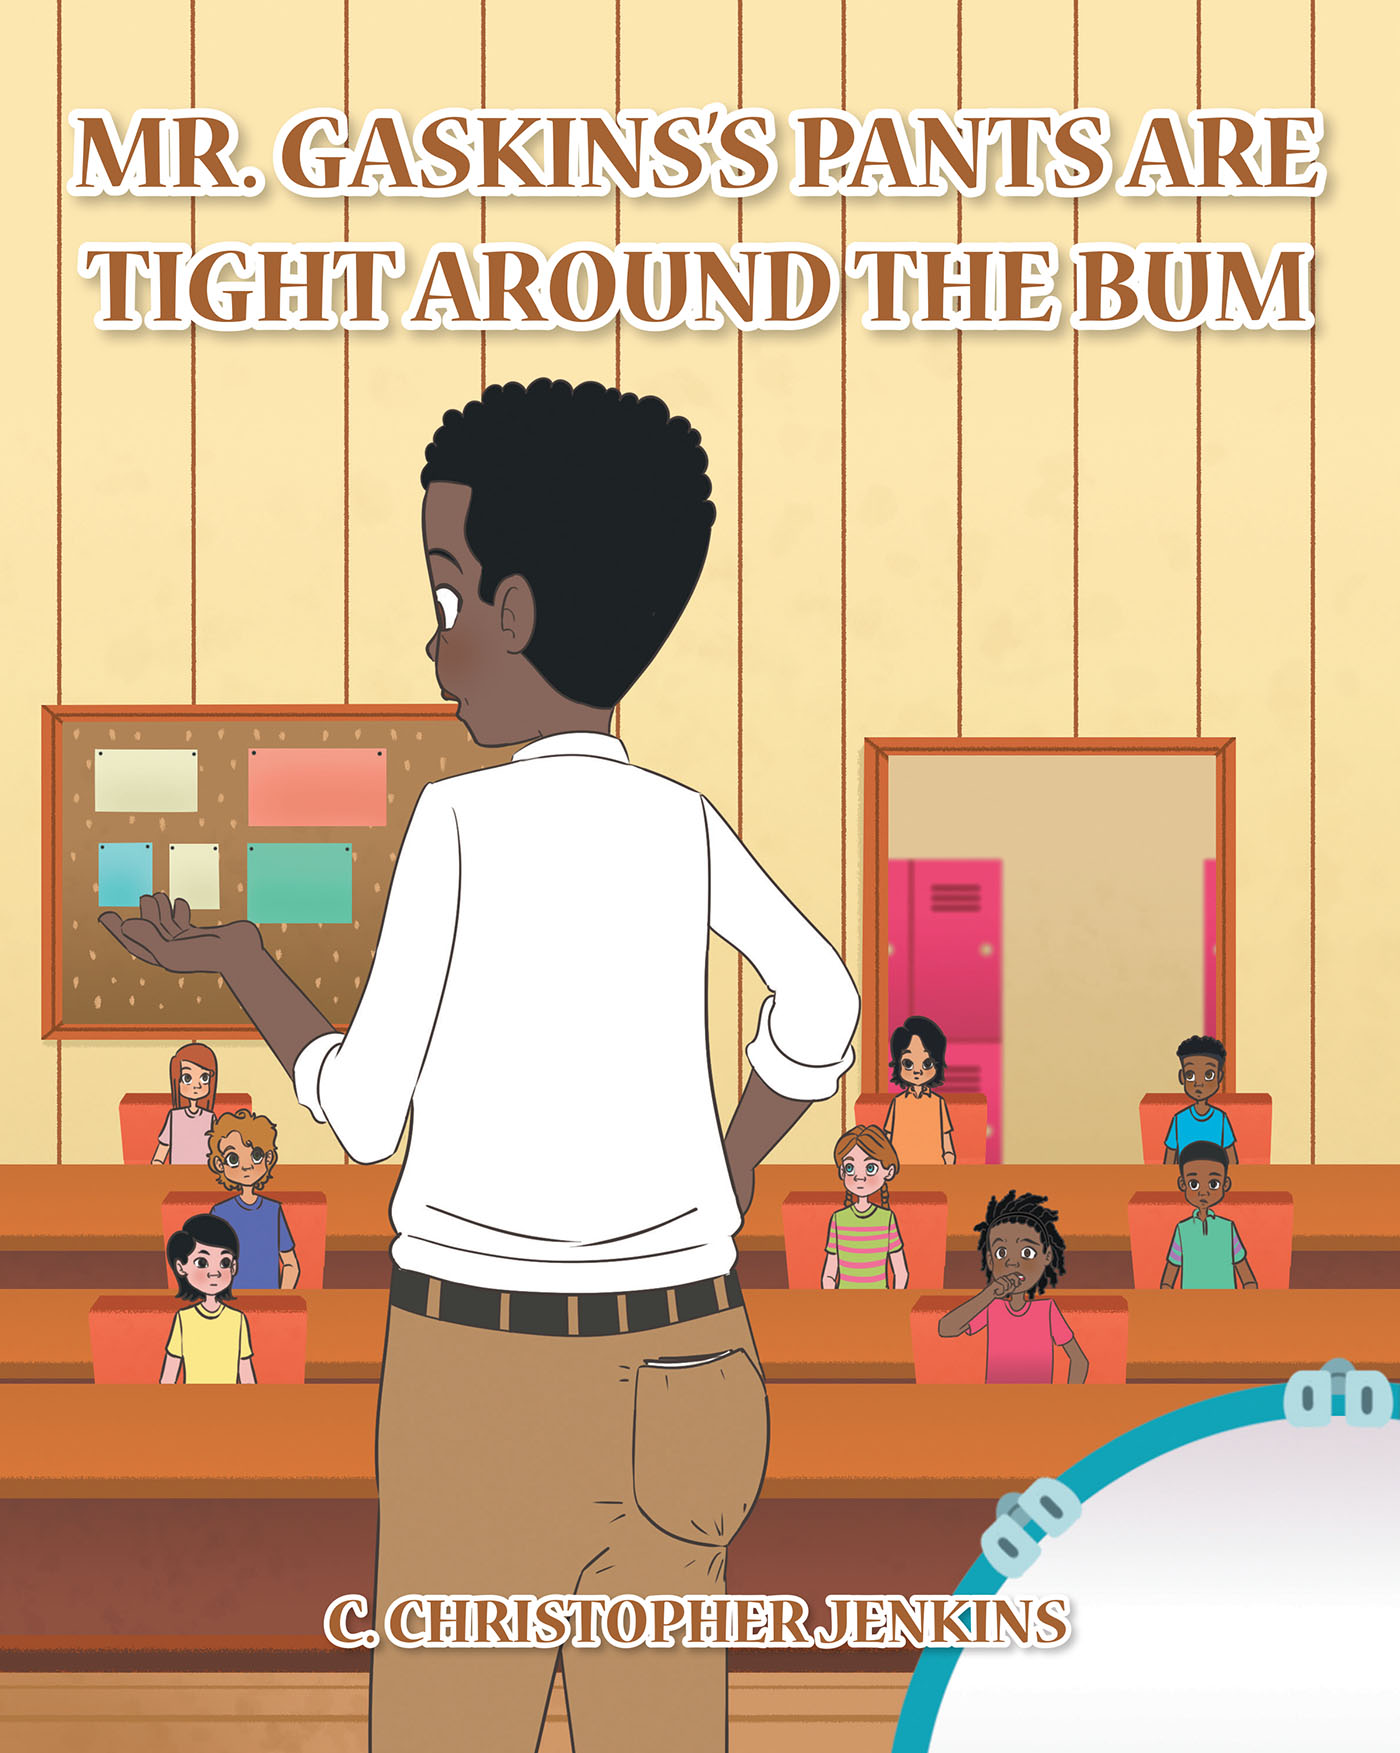 C. Christopher Jenkins’ New Book, "Mr. Gaskins's Pants Are Tight around the Bum," is a Fun and Whimsical Children’s Story That is a Thoughtful Twist on the Alphabet Book